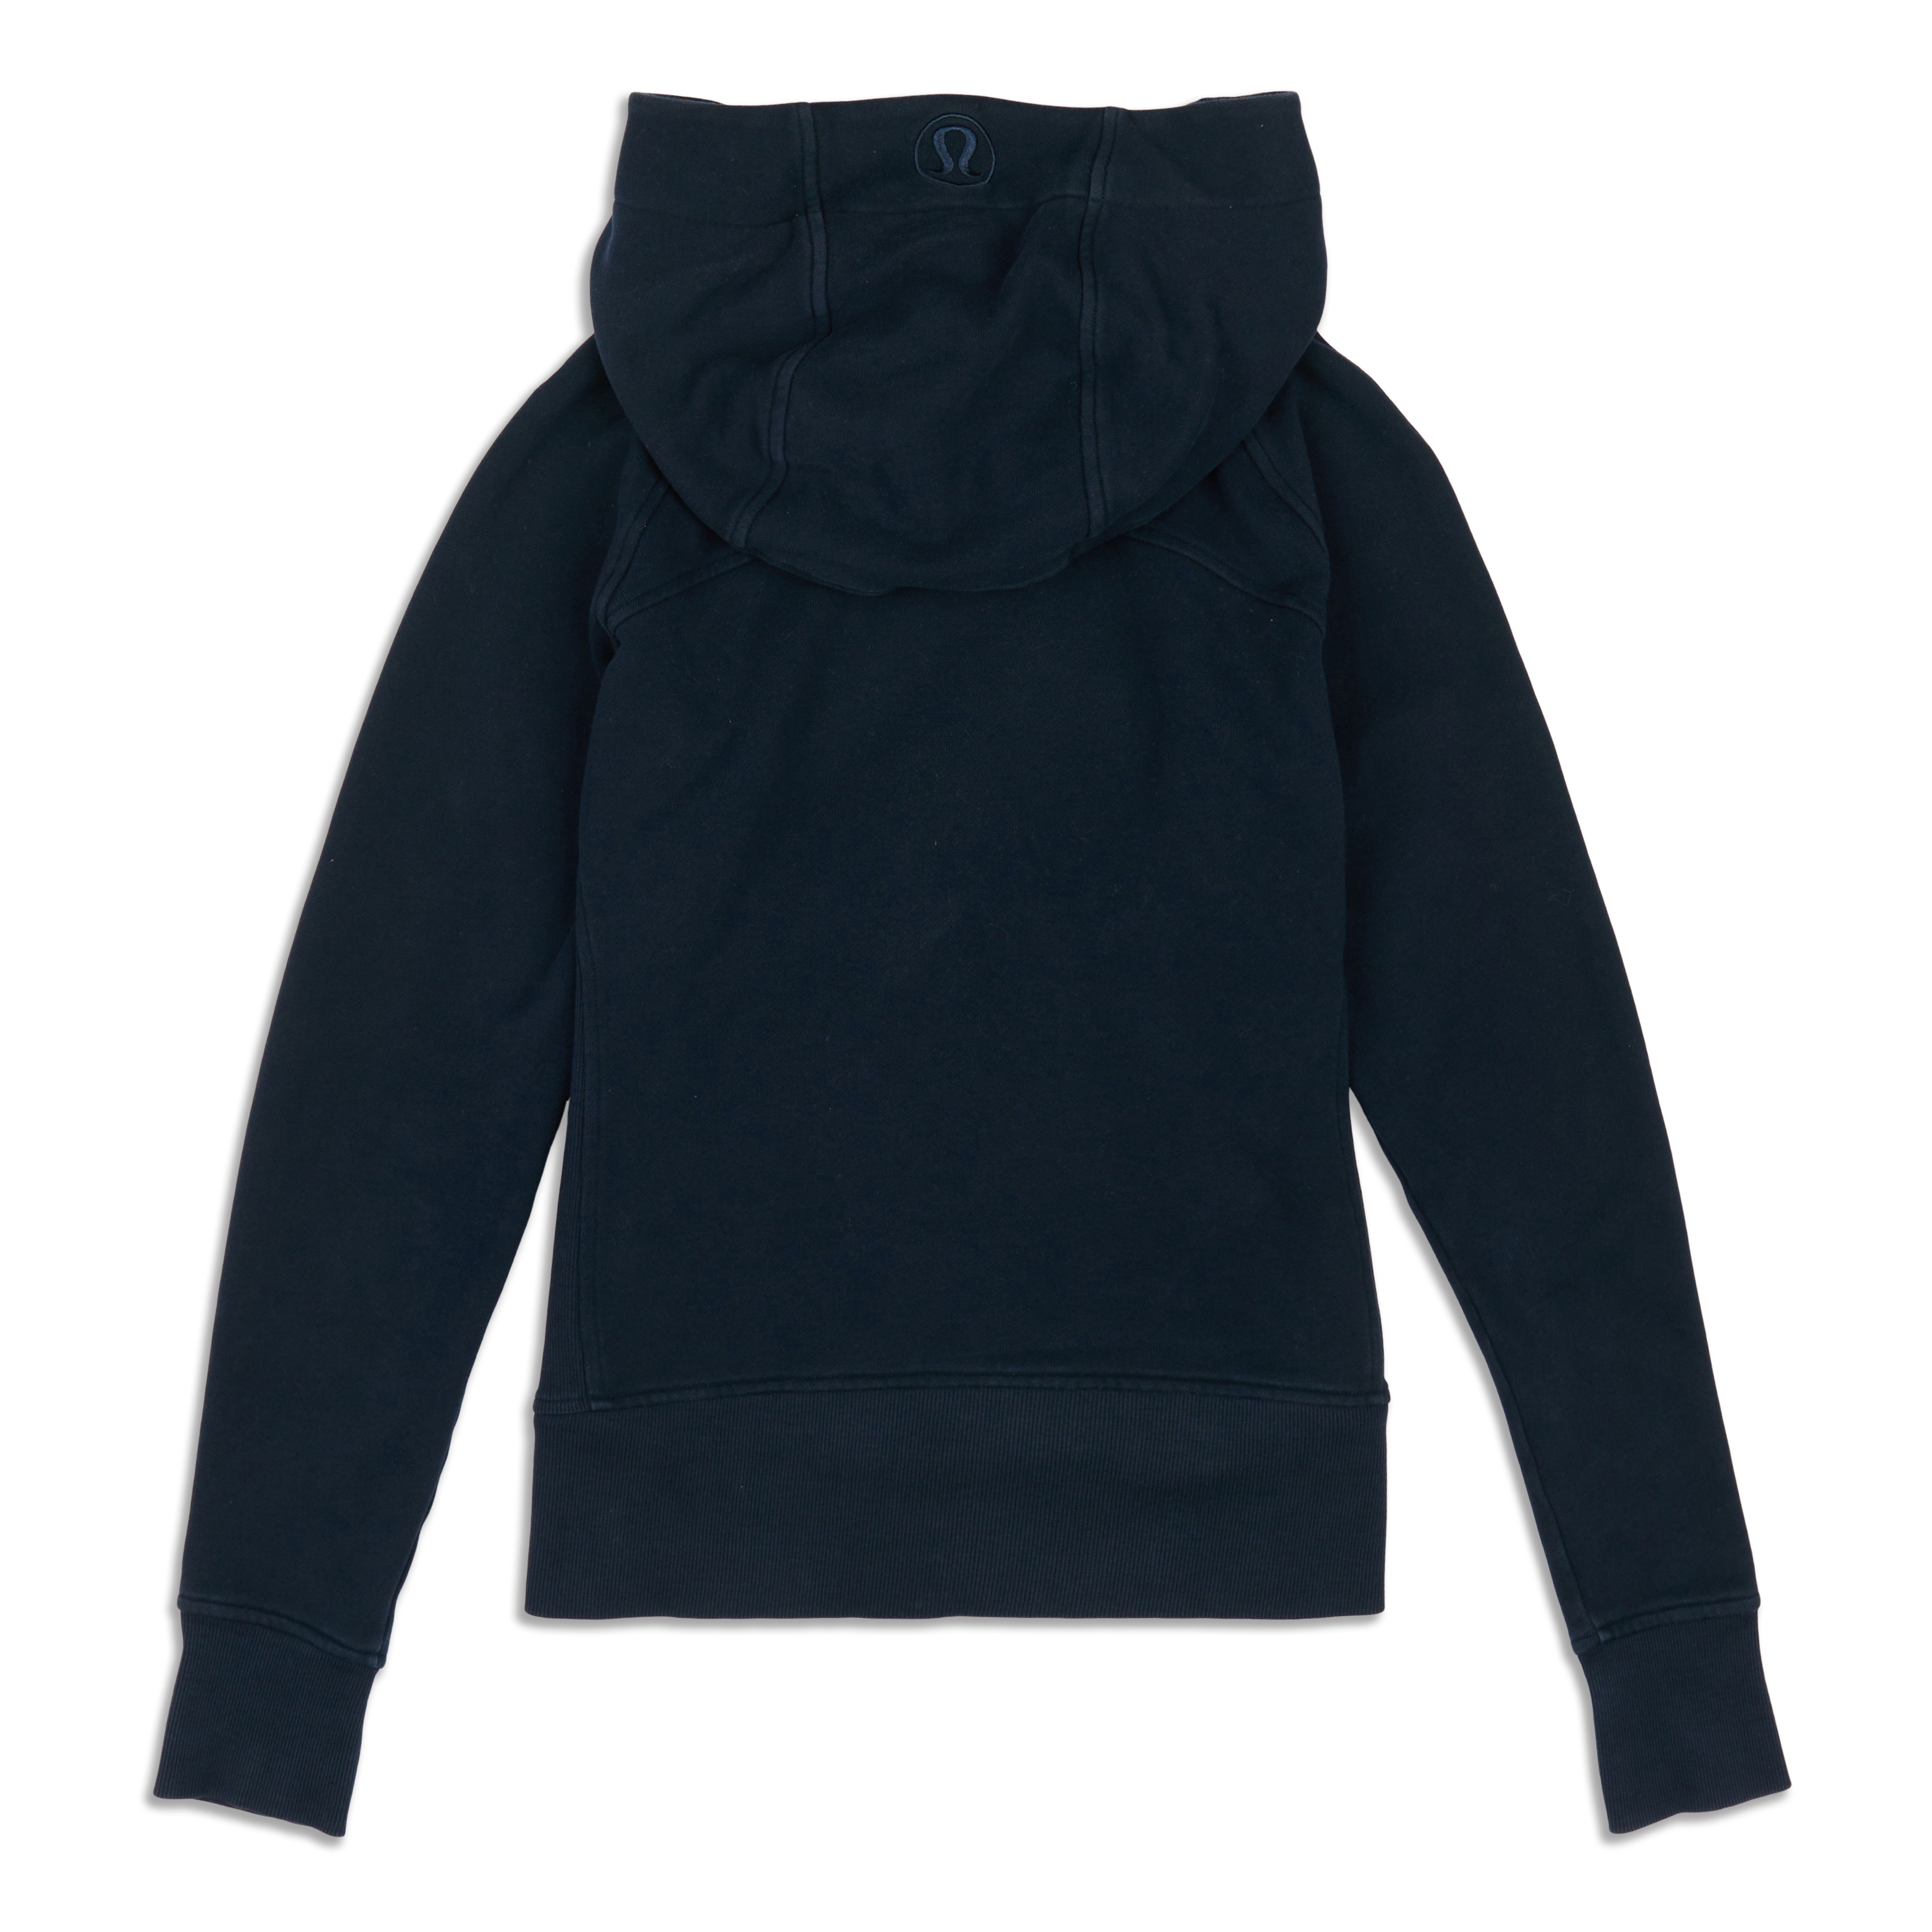 Save $30 on ADAY's recycled scuba sweatshirts top designs